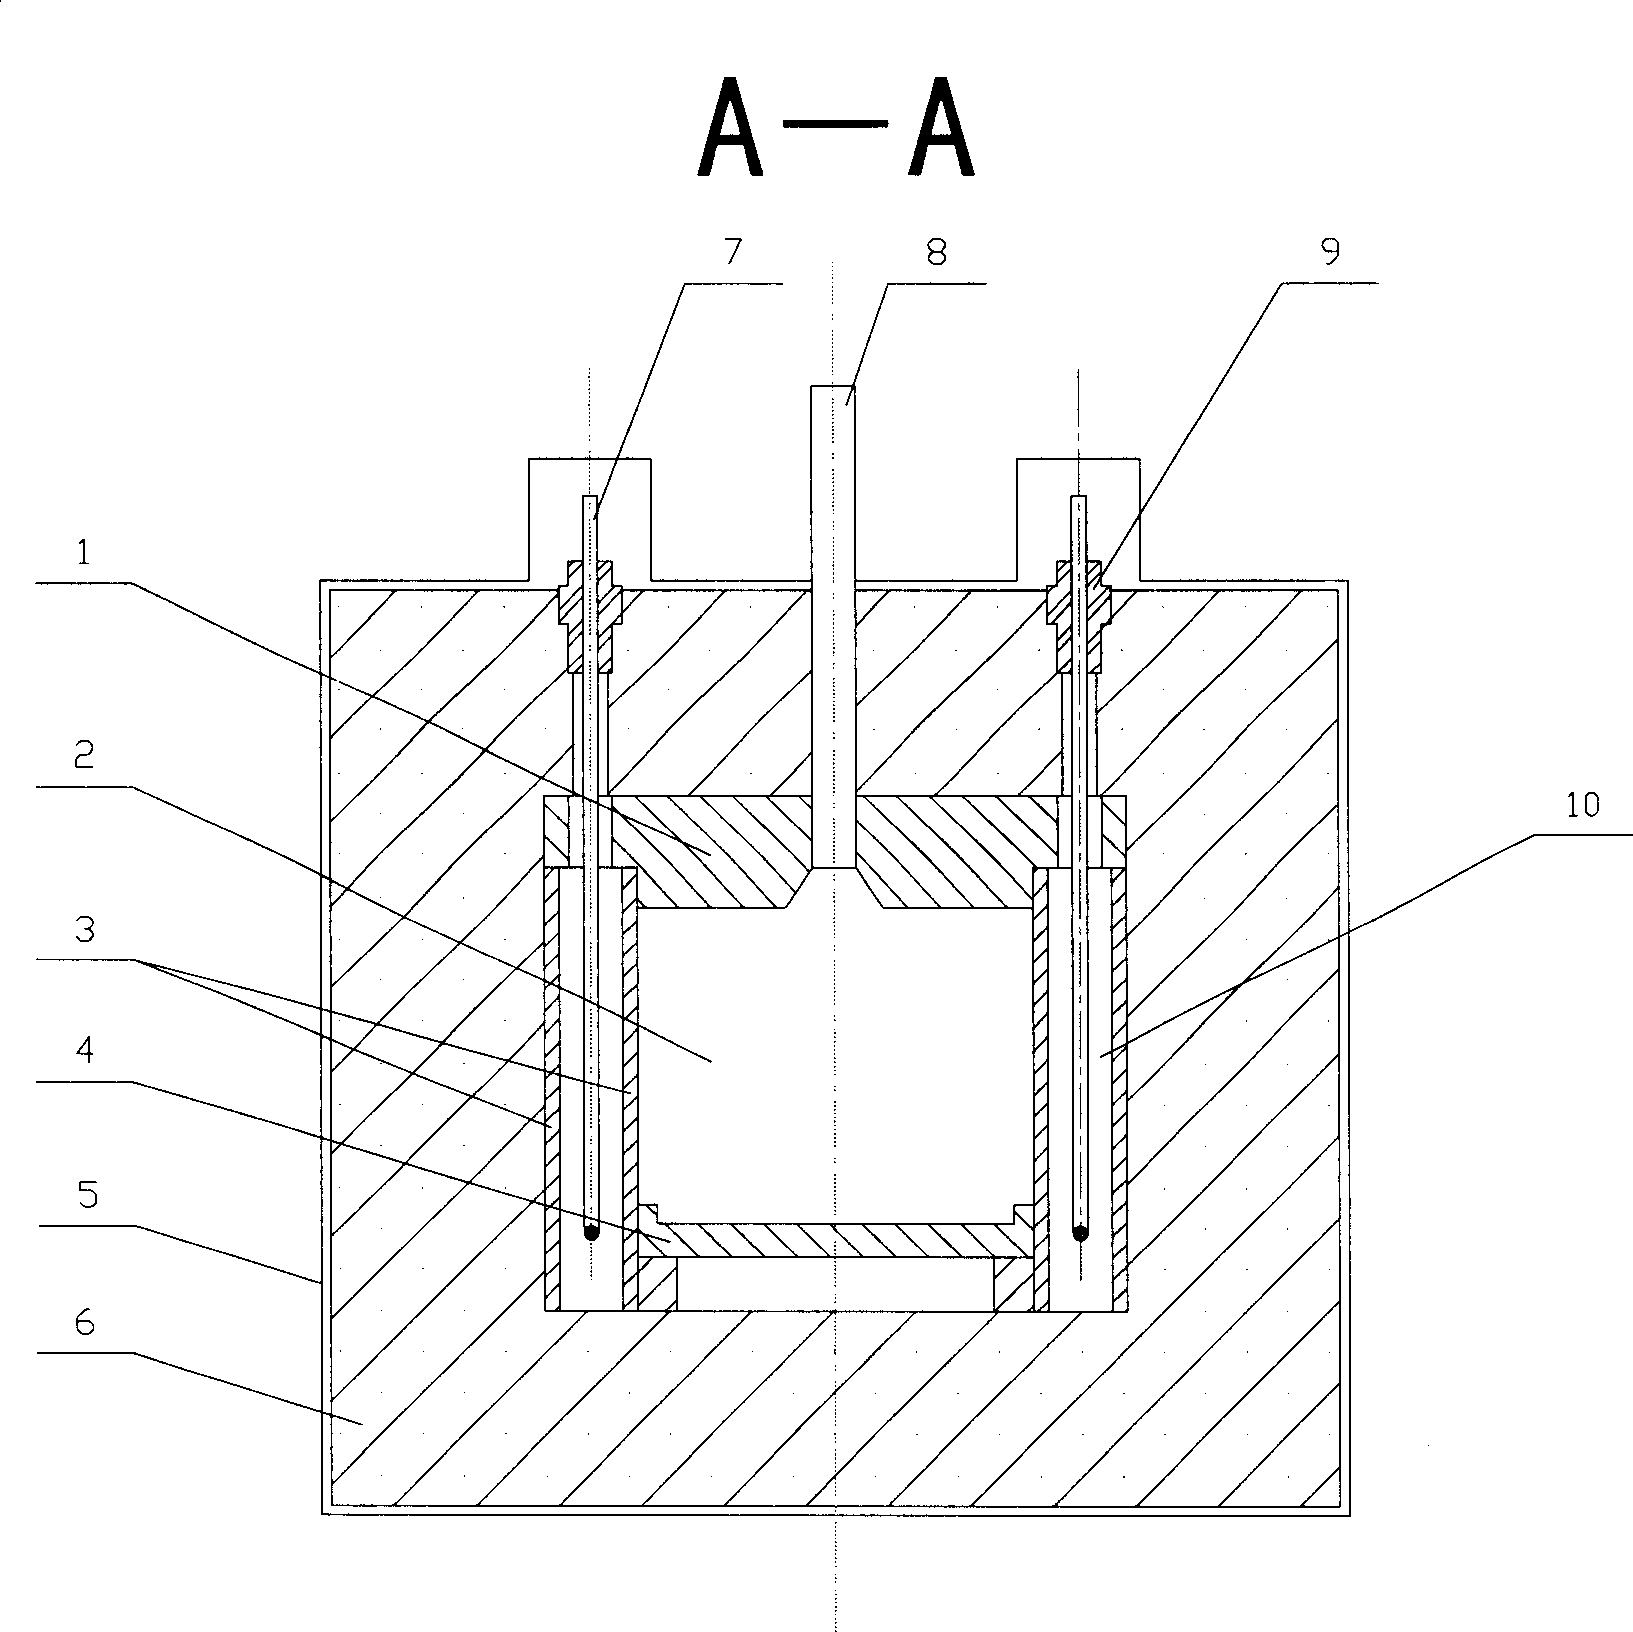 Firebox structure of pusher plate kiln in calcining apparatuses for preparing alloy of vanadium-nitrogen continously